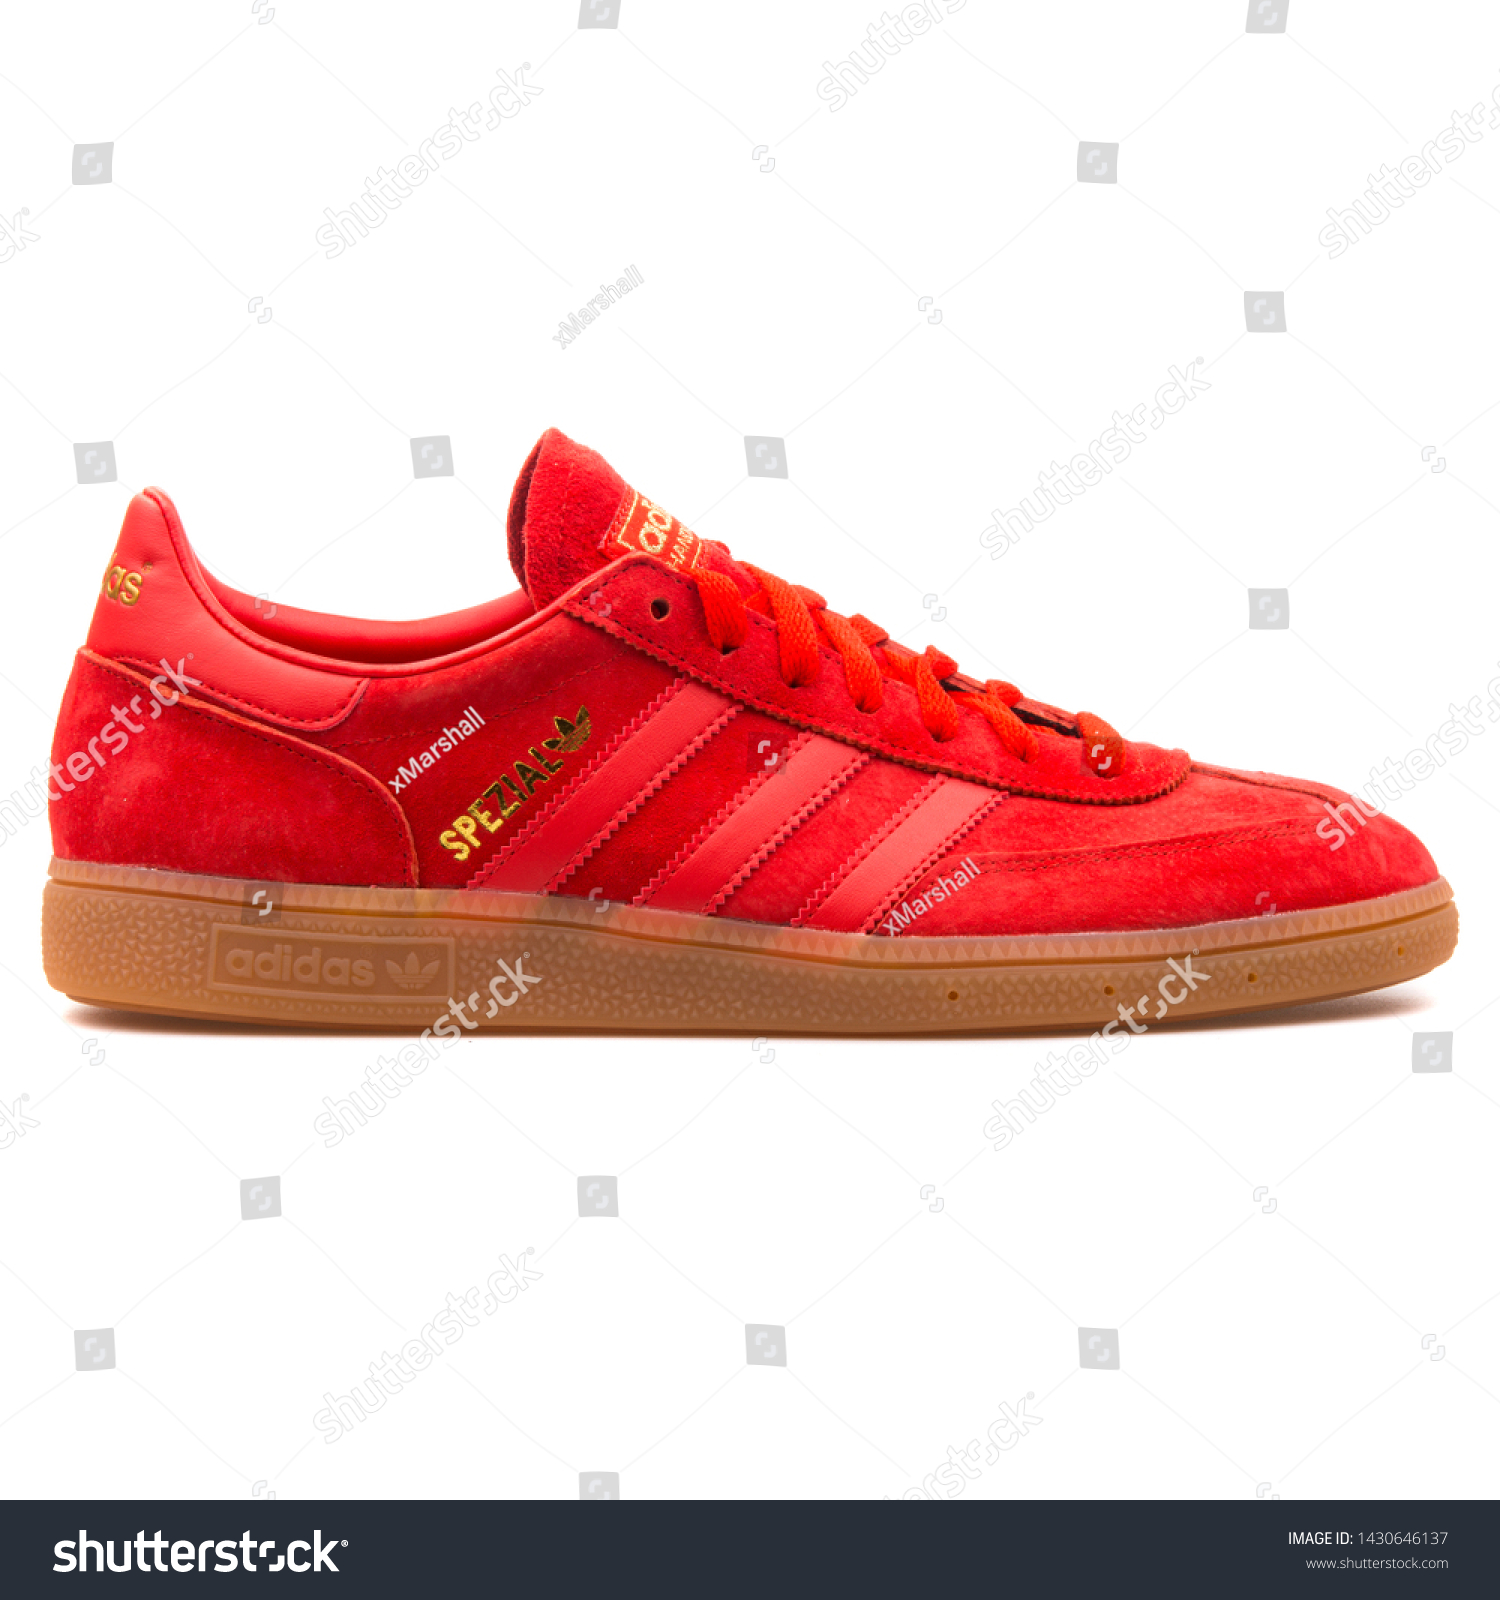 adidas spezial red and white